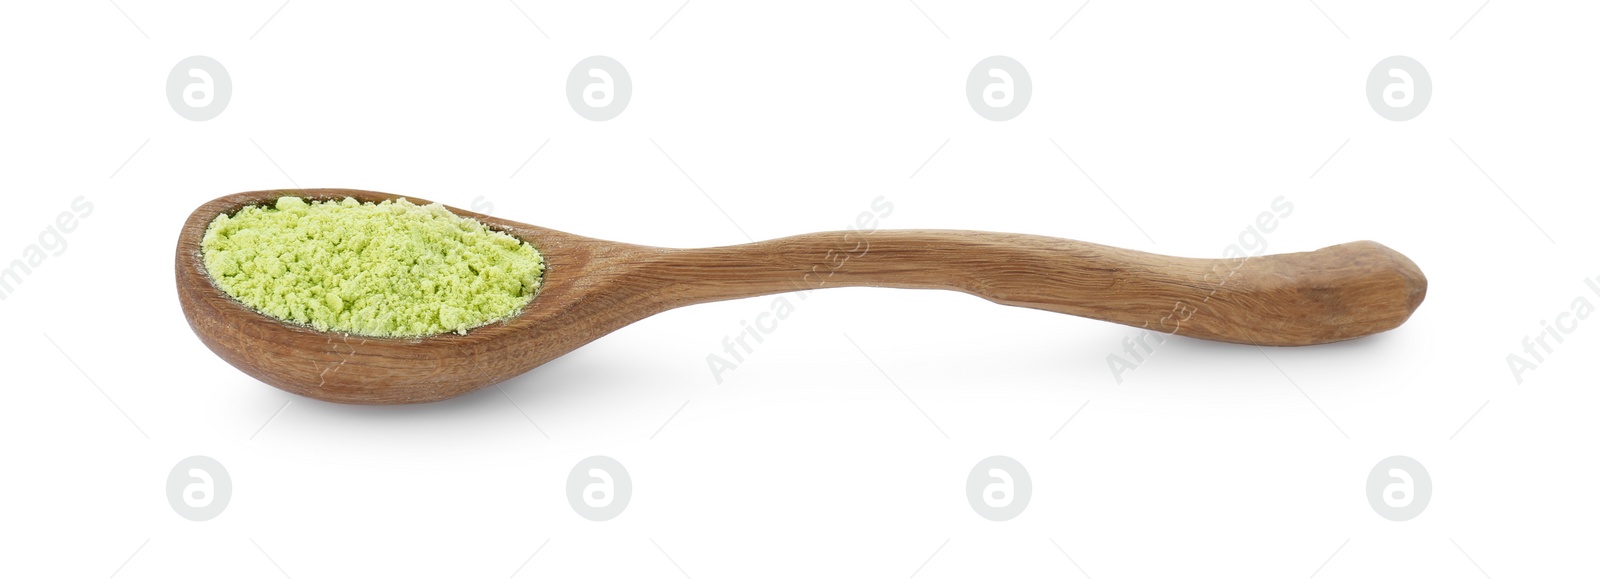 Photo of Wooden spoon of celery powder isolated on white